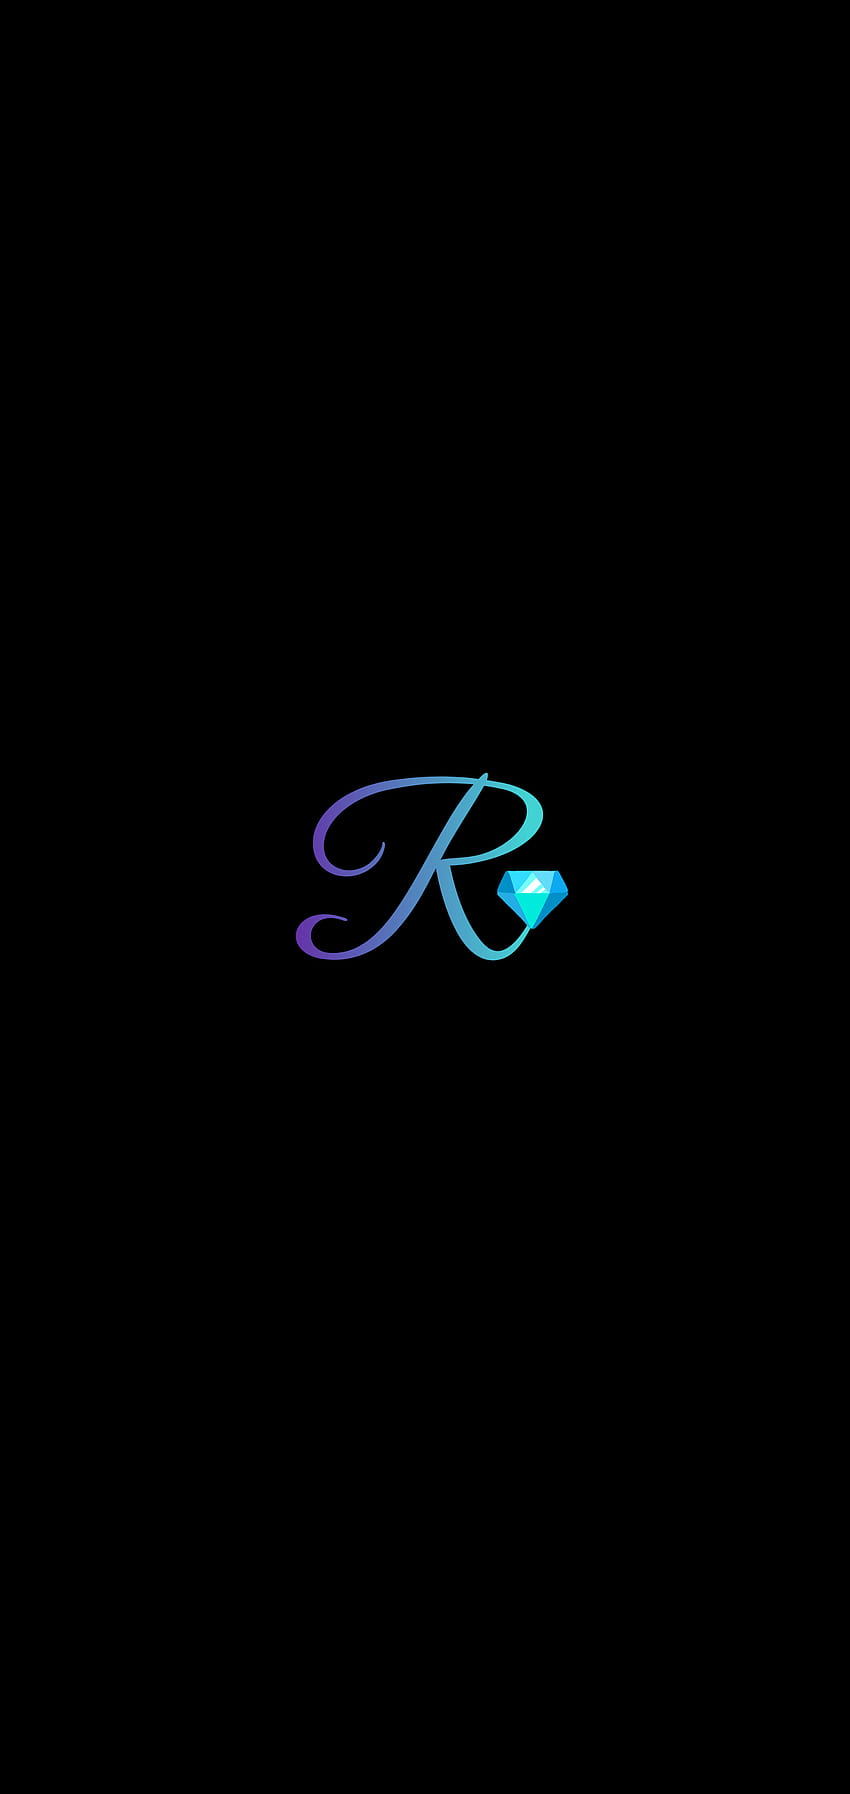 R Name wallpaper wallpaper by Ustakhtar  Download on ZEDGE  db8c